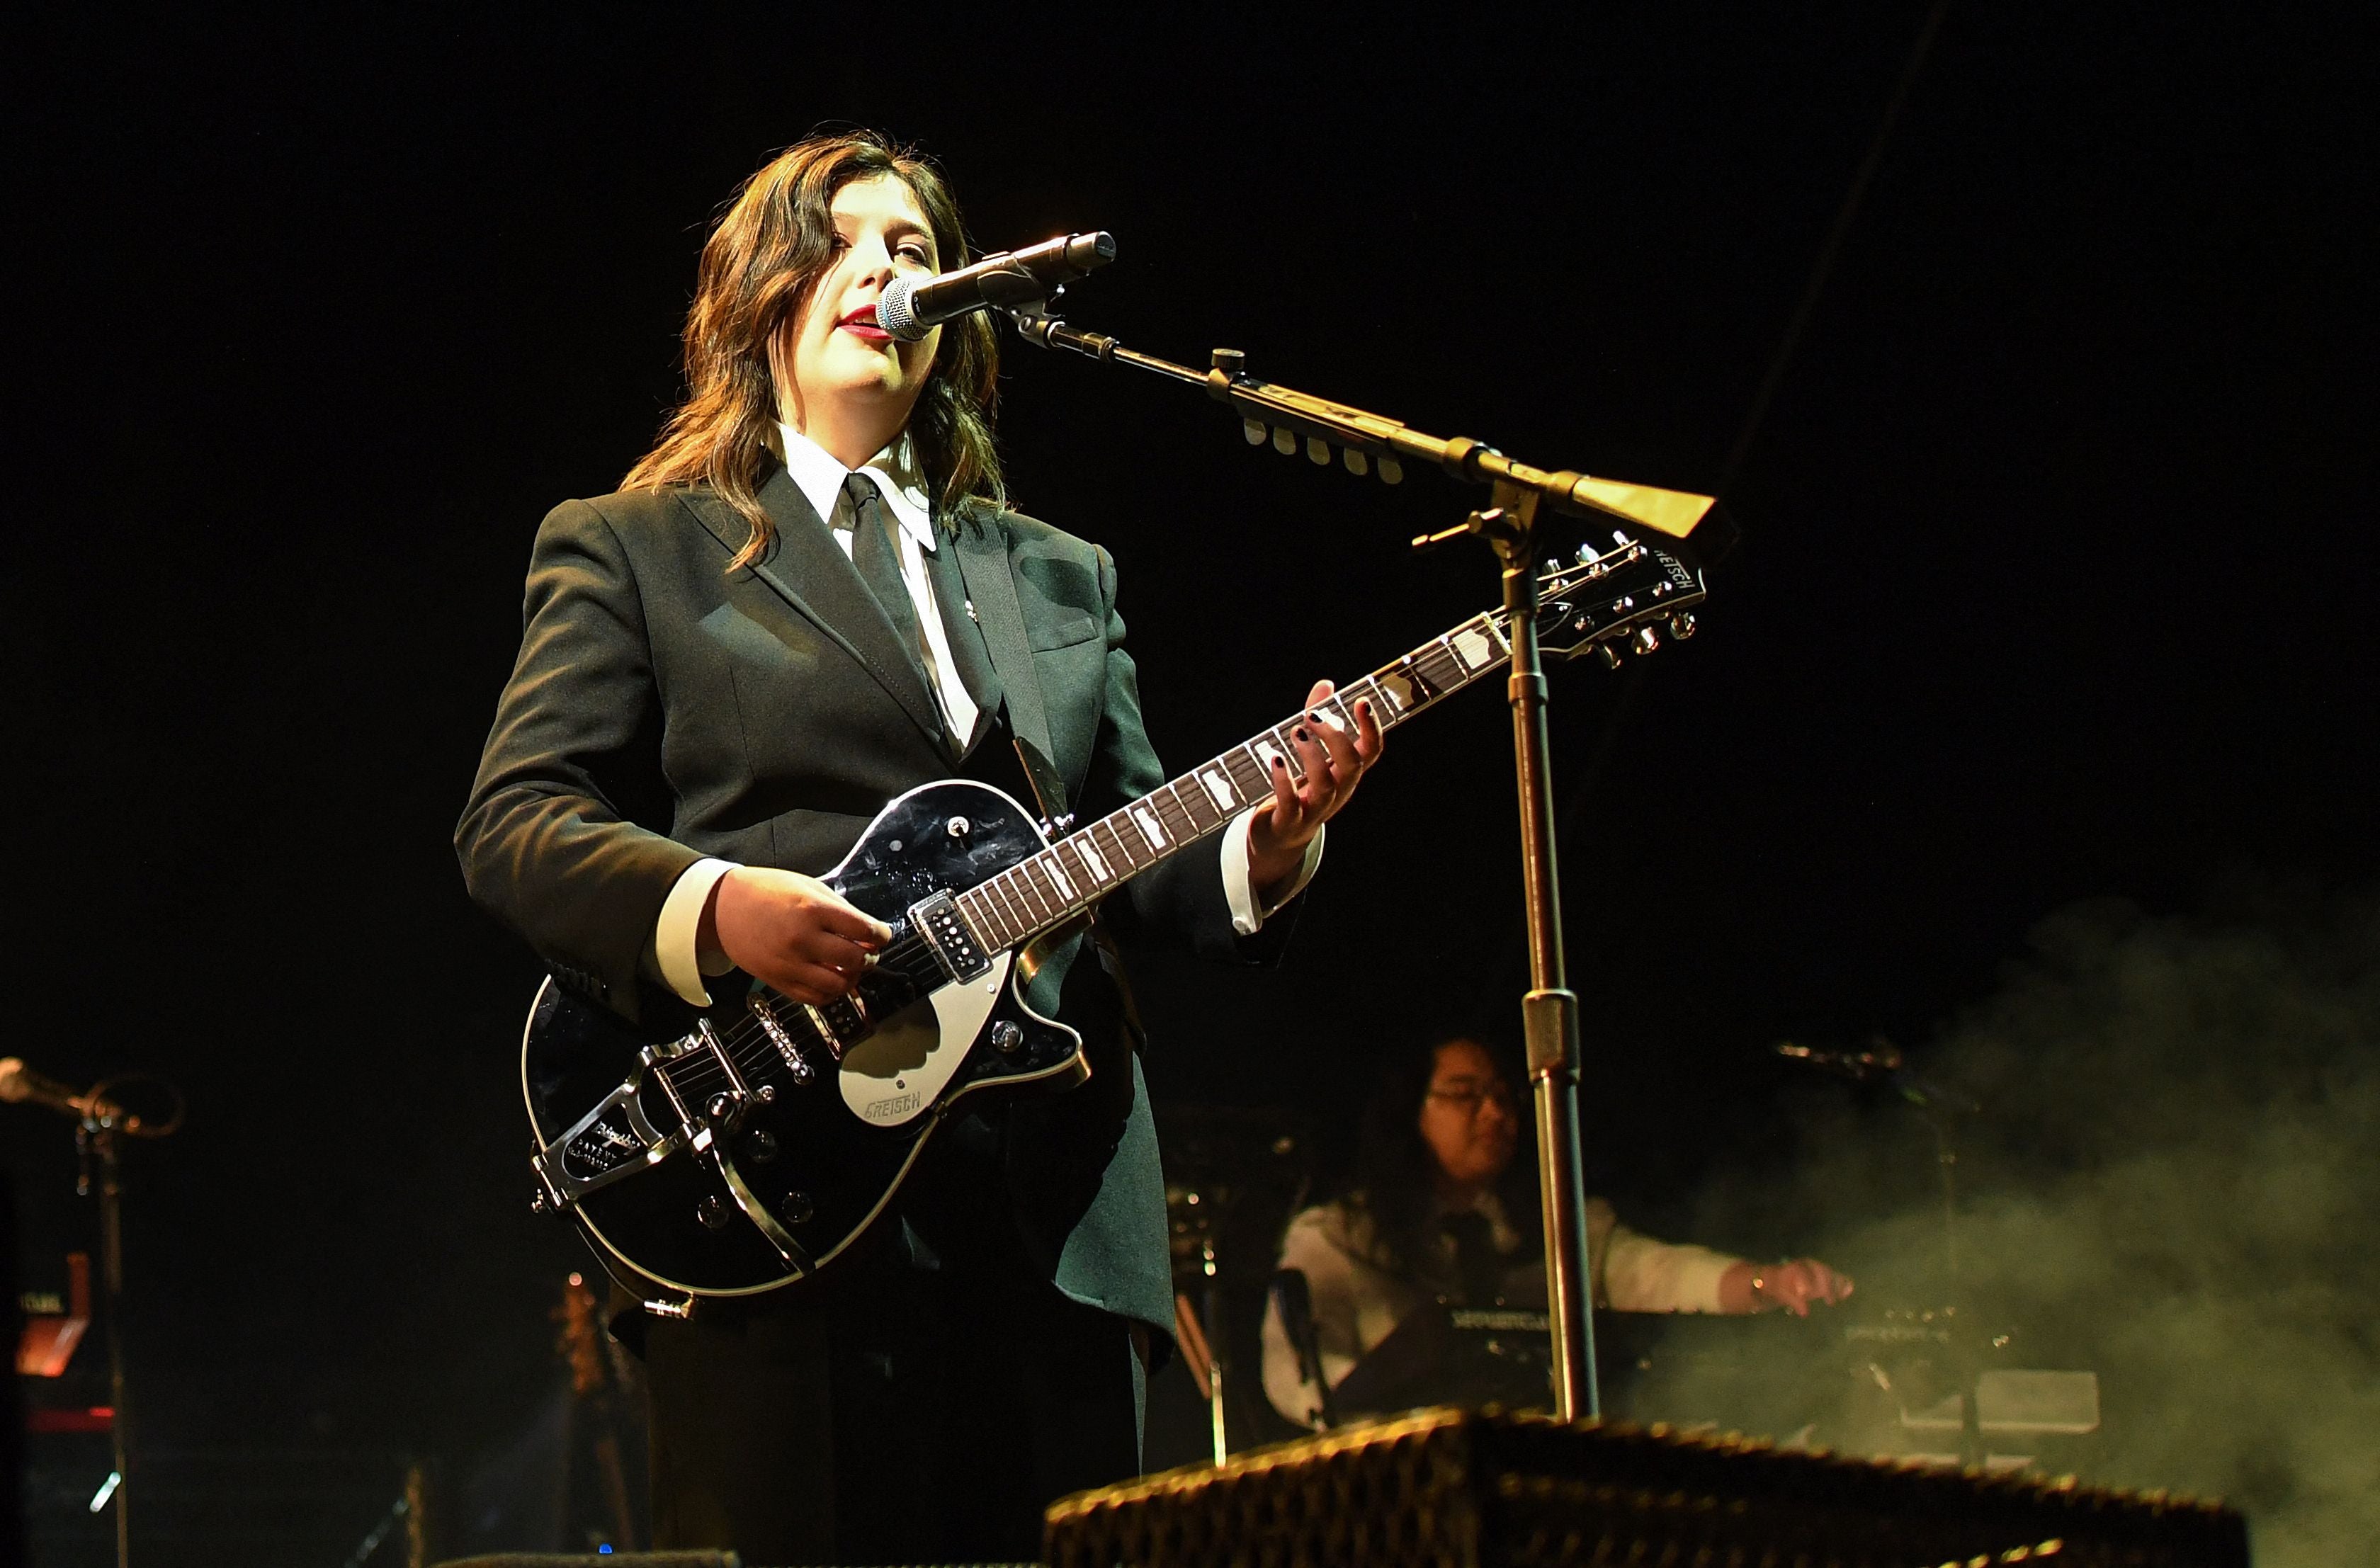 Musician Lucy Dacus from Boysgenius performs on the Coachella stage during the first weekend of the Coachella Valley Music and Arts Festival in Indio, California, on April 15, 2023.